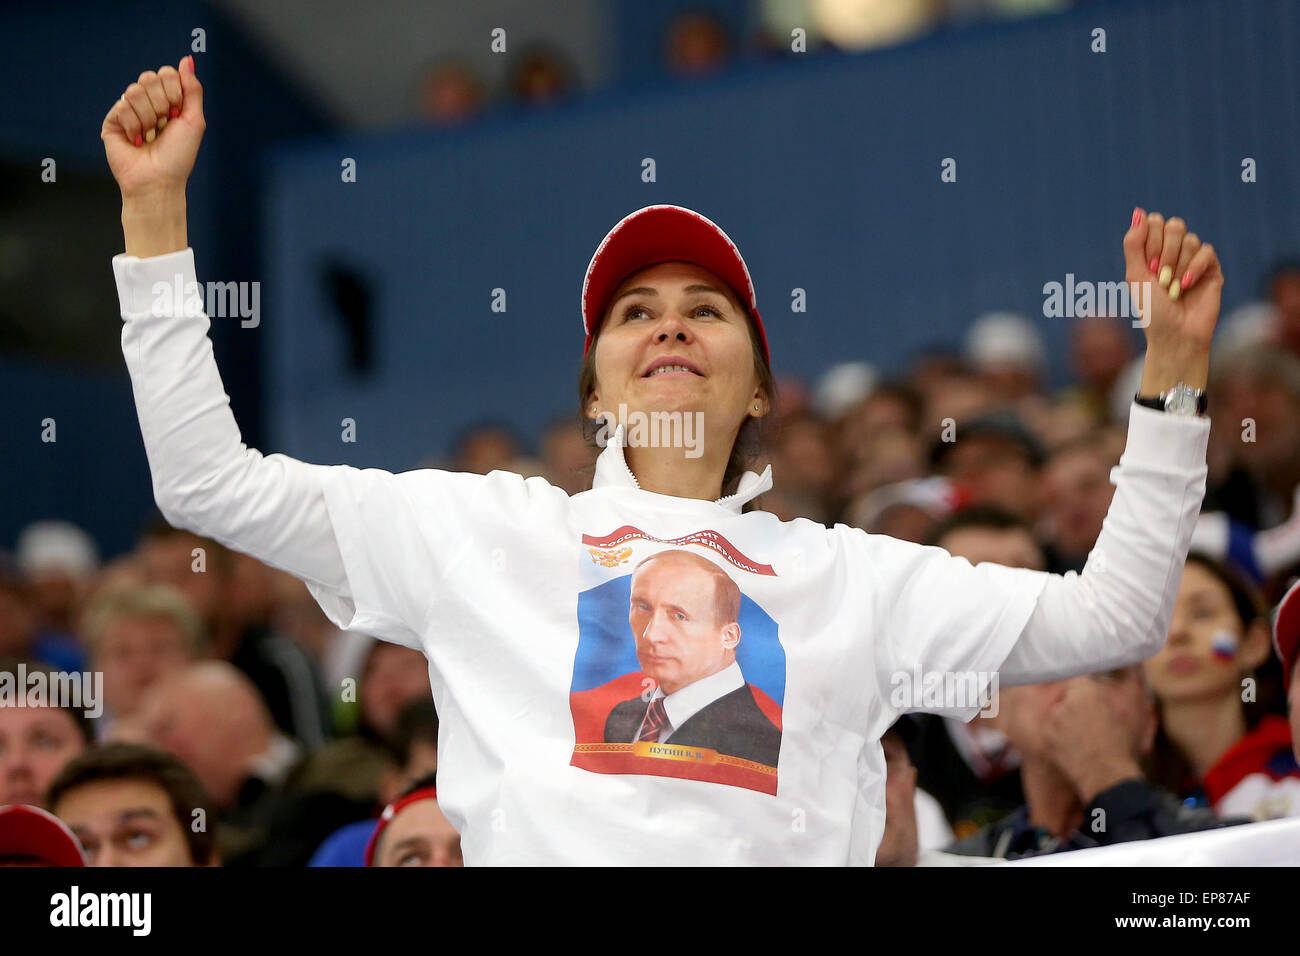 Ostrava, Czech Republic. 14th May, 2015. Russian female fan in T-shirt with Vladimir Putin on it cheers up during the Hockey World Championships quarterfinal match Sweden vs Russia in Ostrava, Czech Republic, May 14, 2015. Credit:  Petr Sznapka/CTK Photo/Alamy Live News Stock Photo